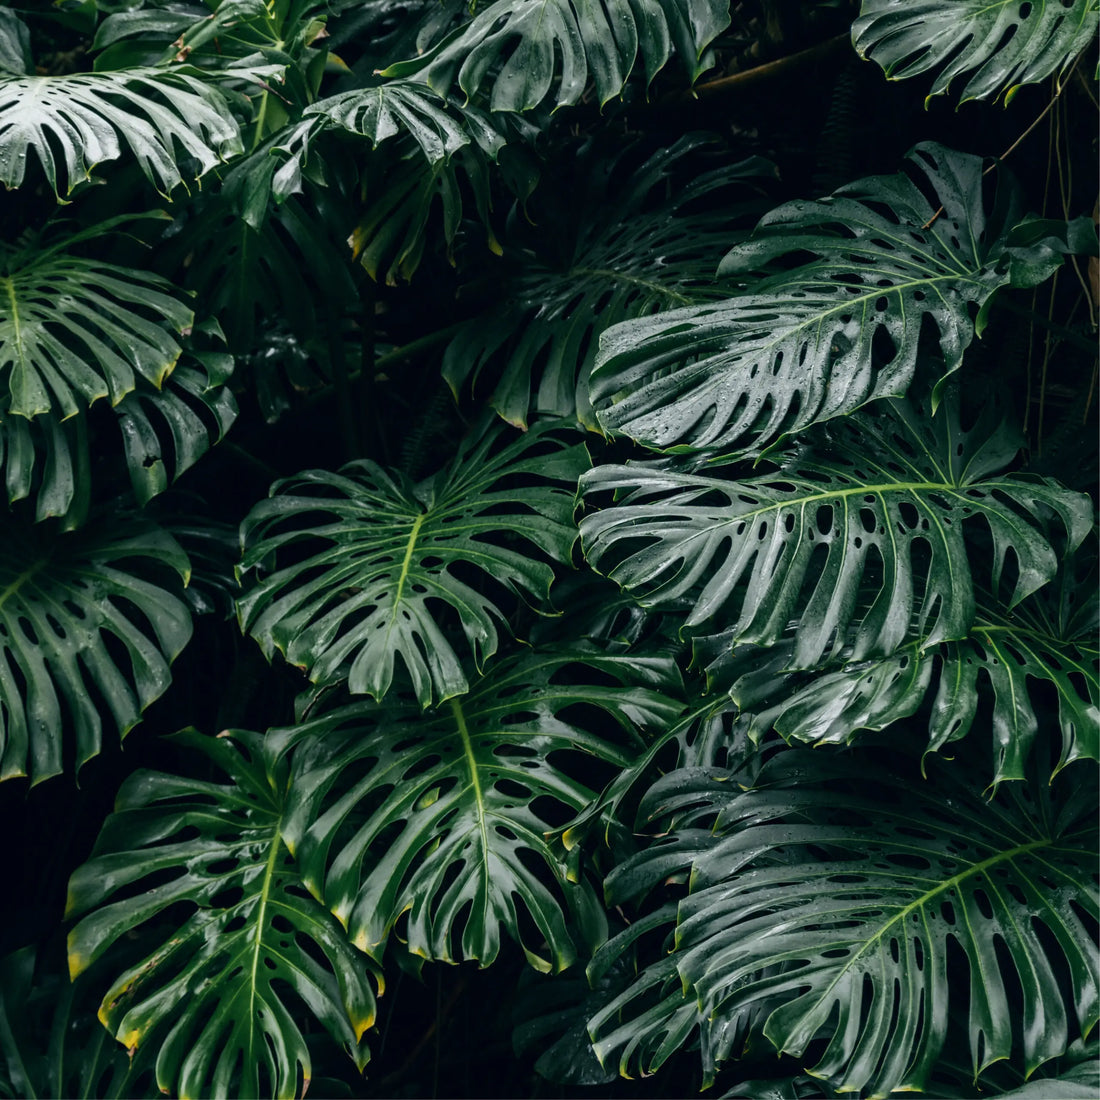 Monstera Plant Care: Tips on How to Care For Monstera Plants